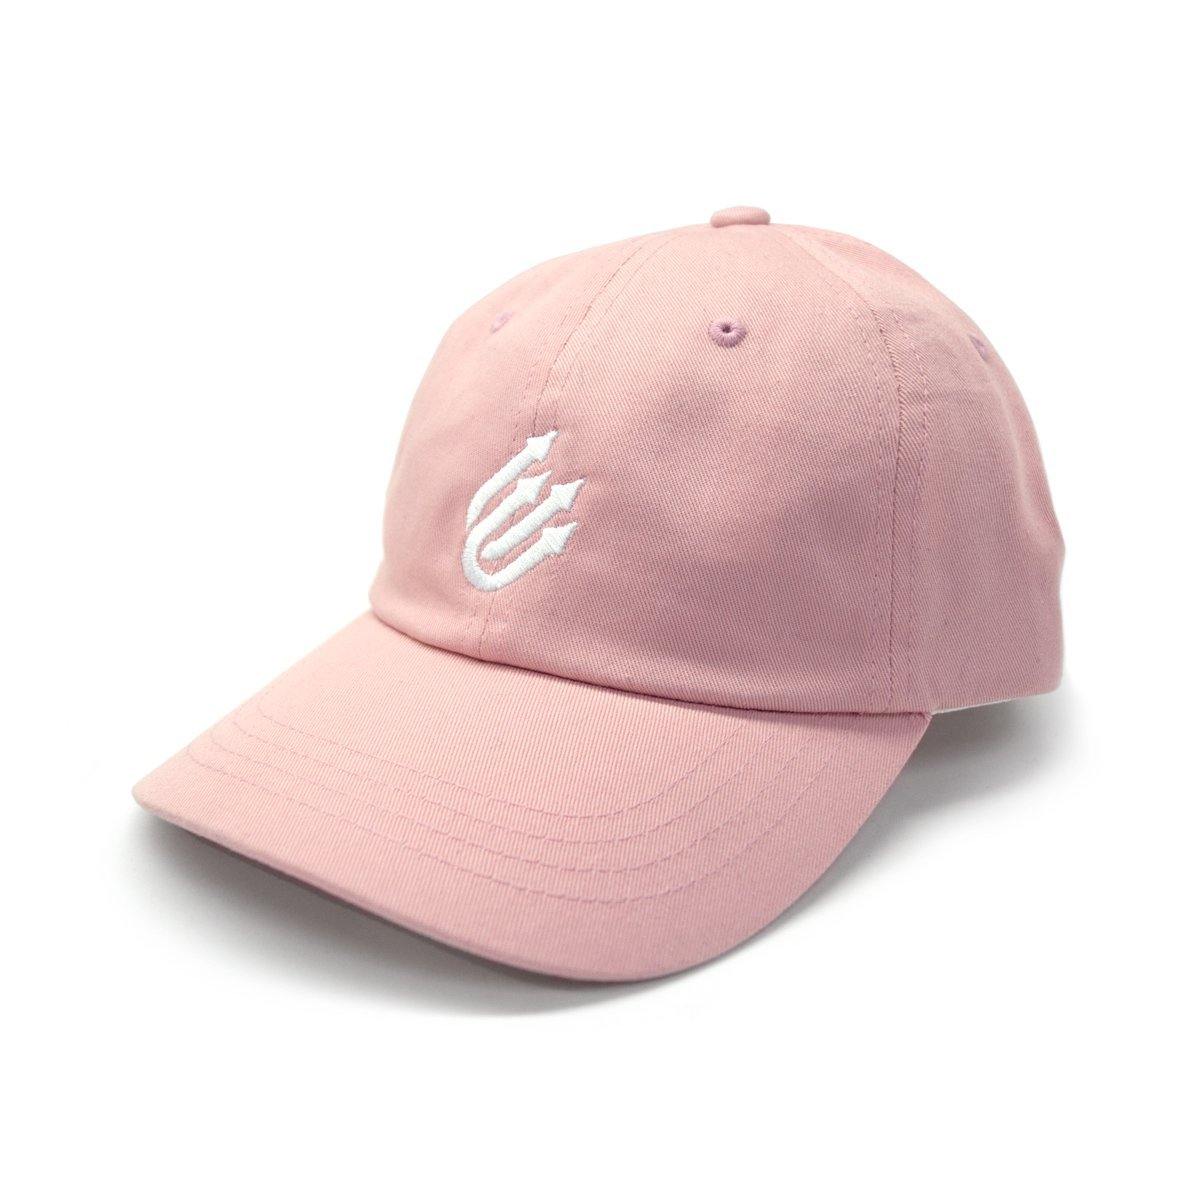 Buy – Cold Cuts Limited "CCL Logo" Hat – Band & Music Merch – Cold Cuts Merch